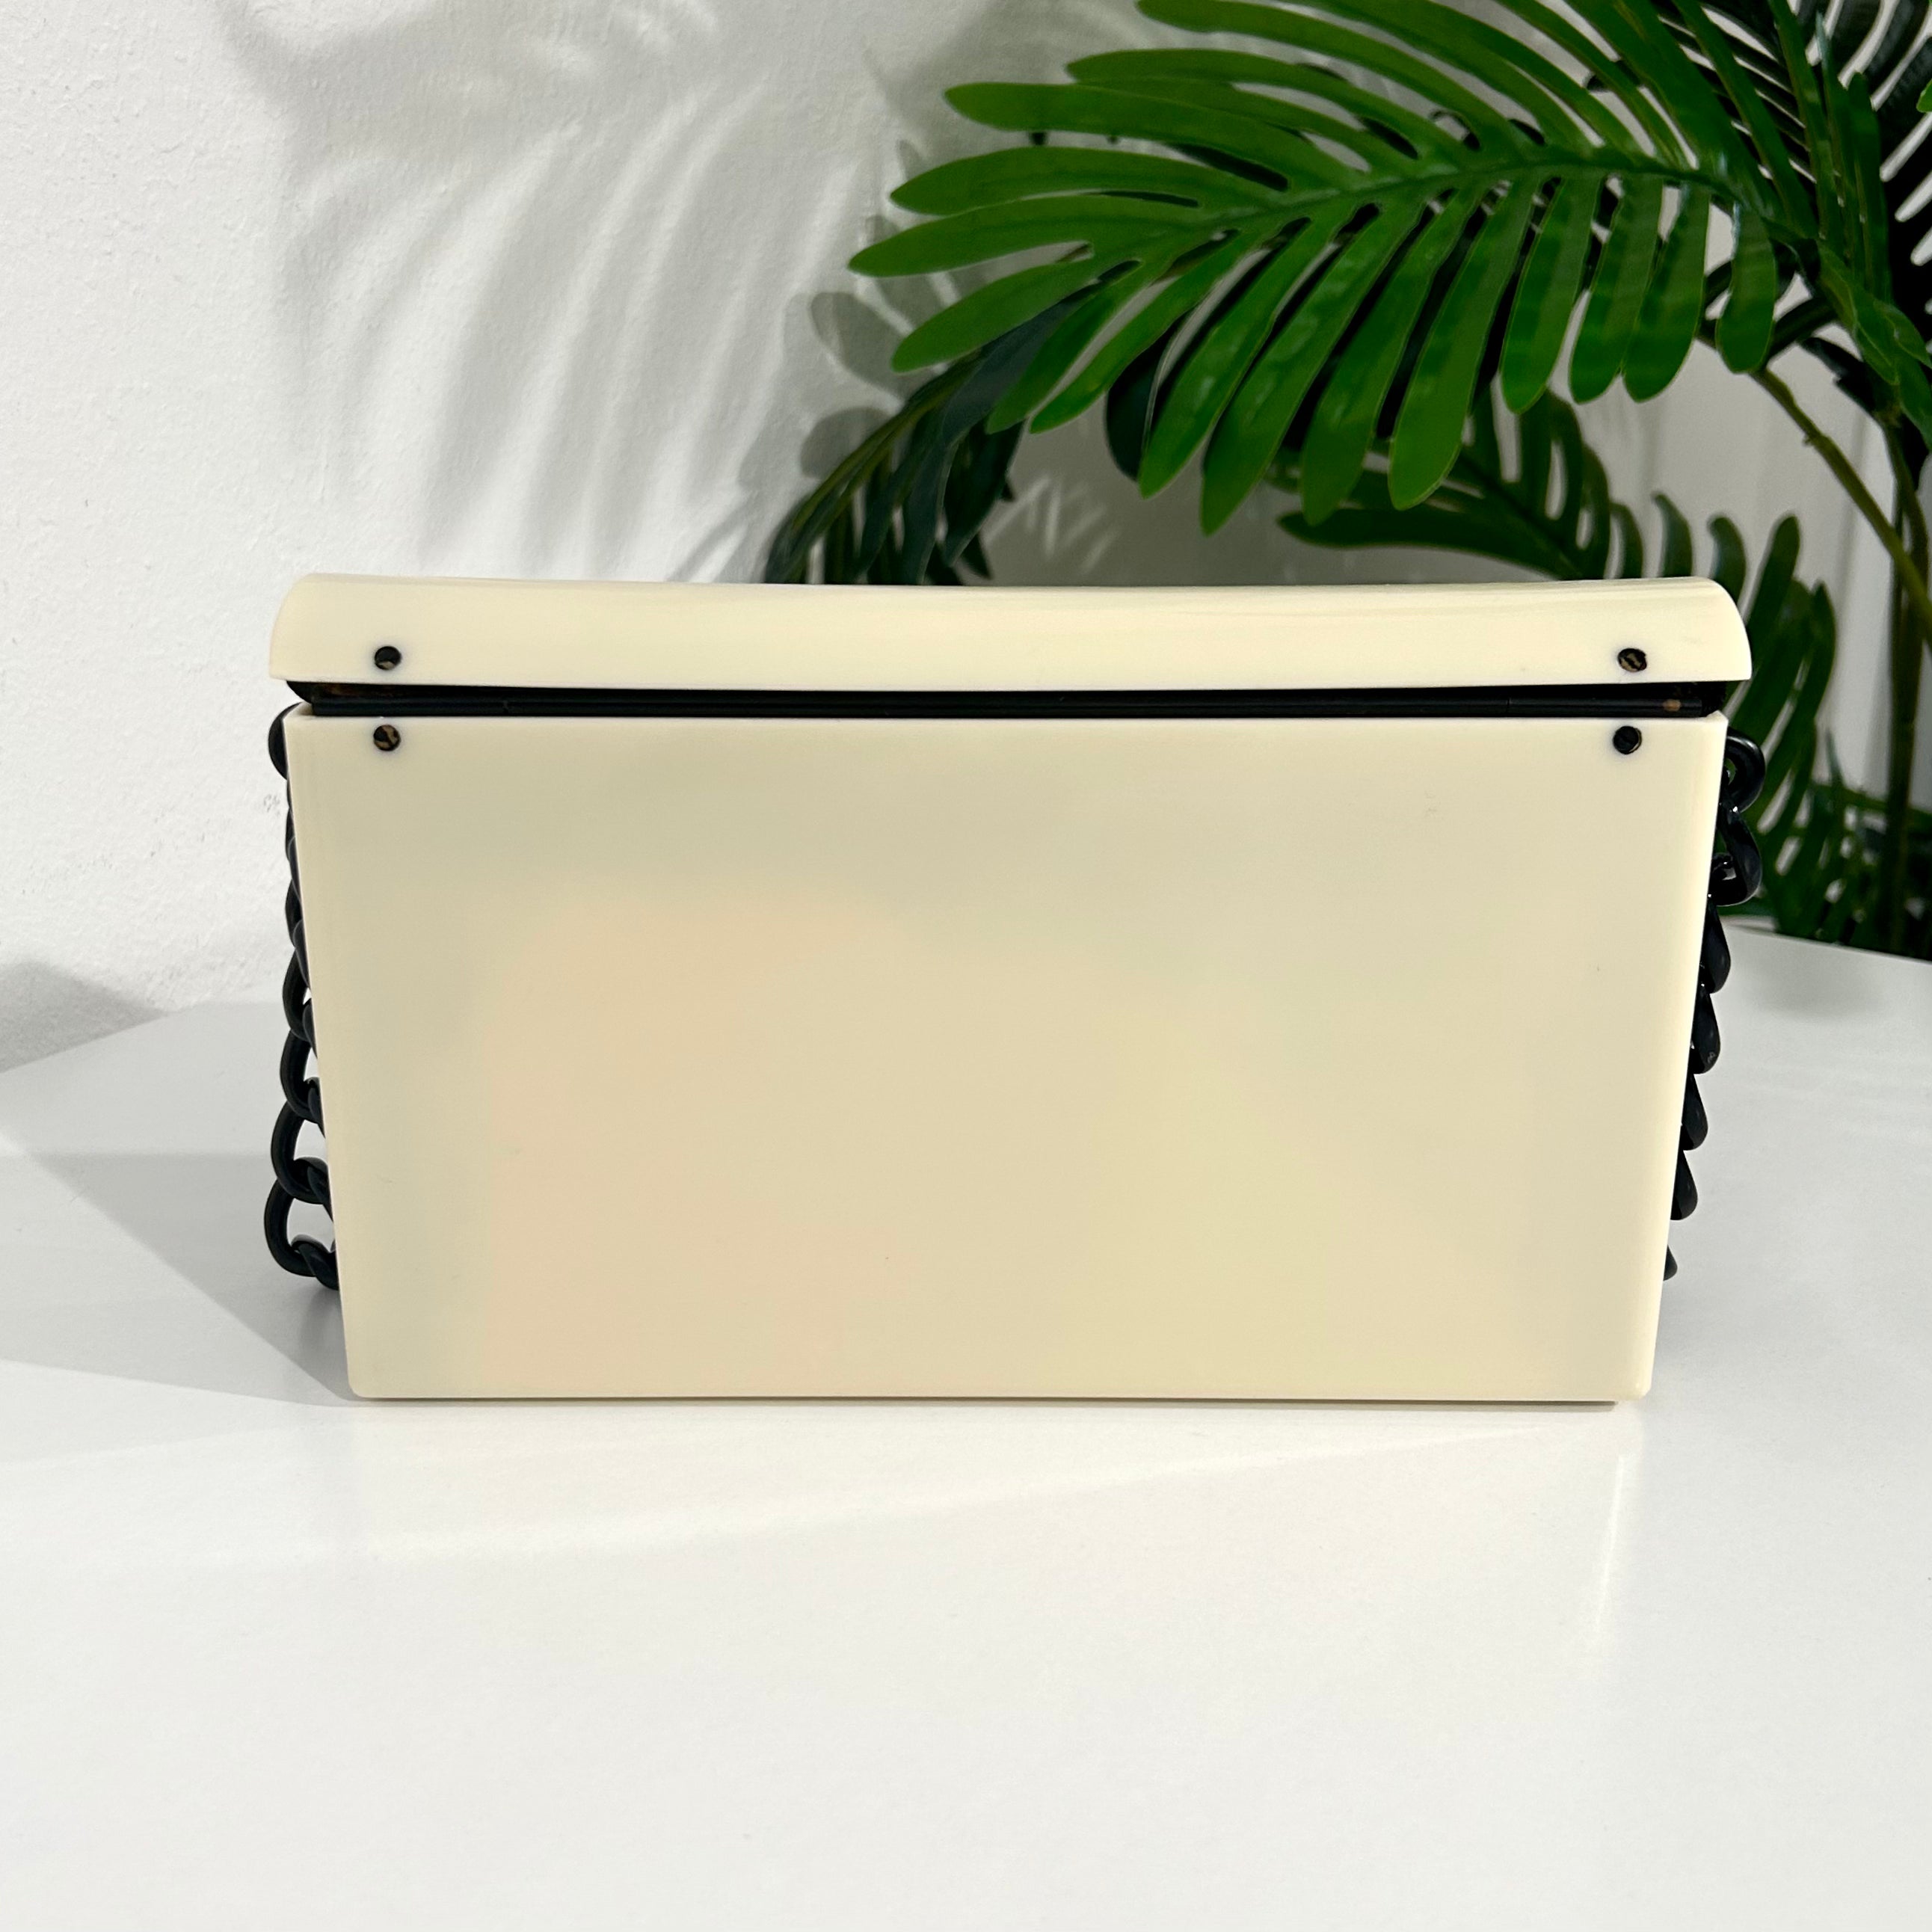 Chanel Vintage Acrylic Flap Bag – Dina C's Fab and Funky